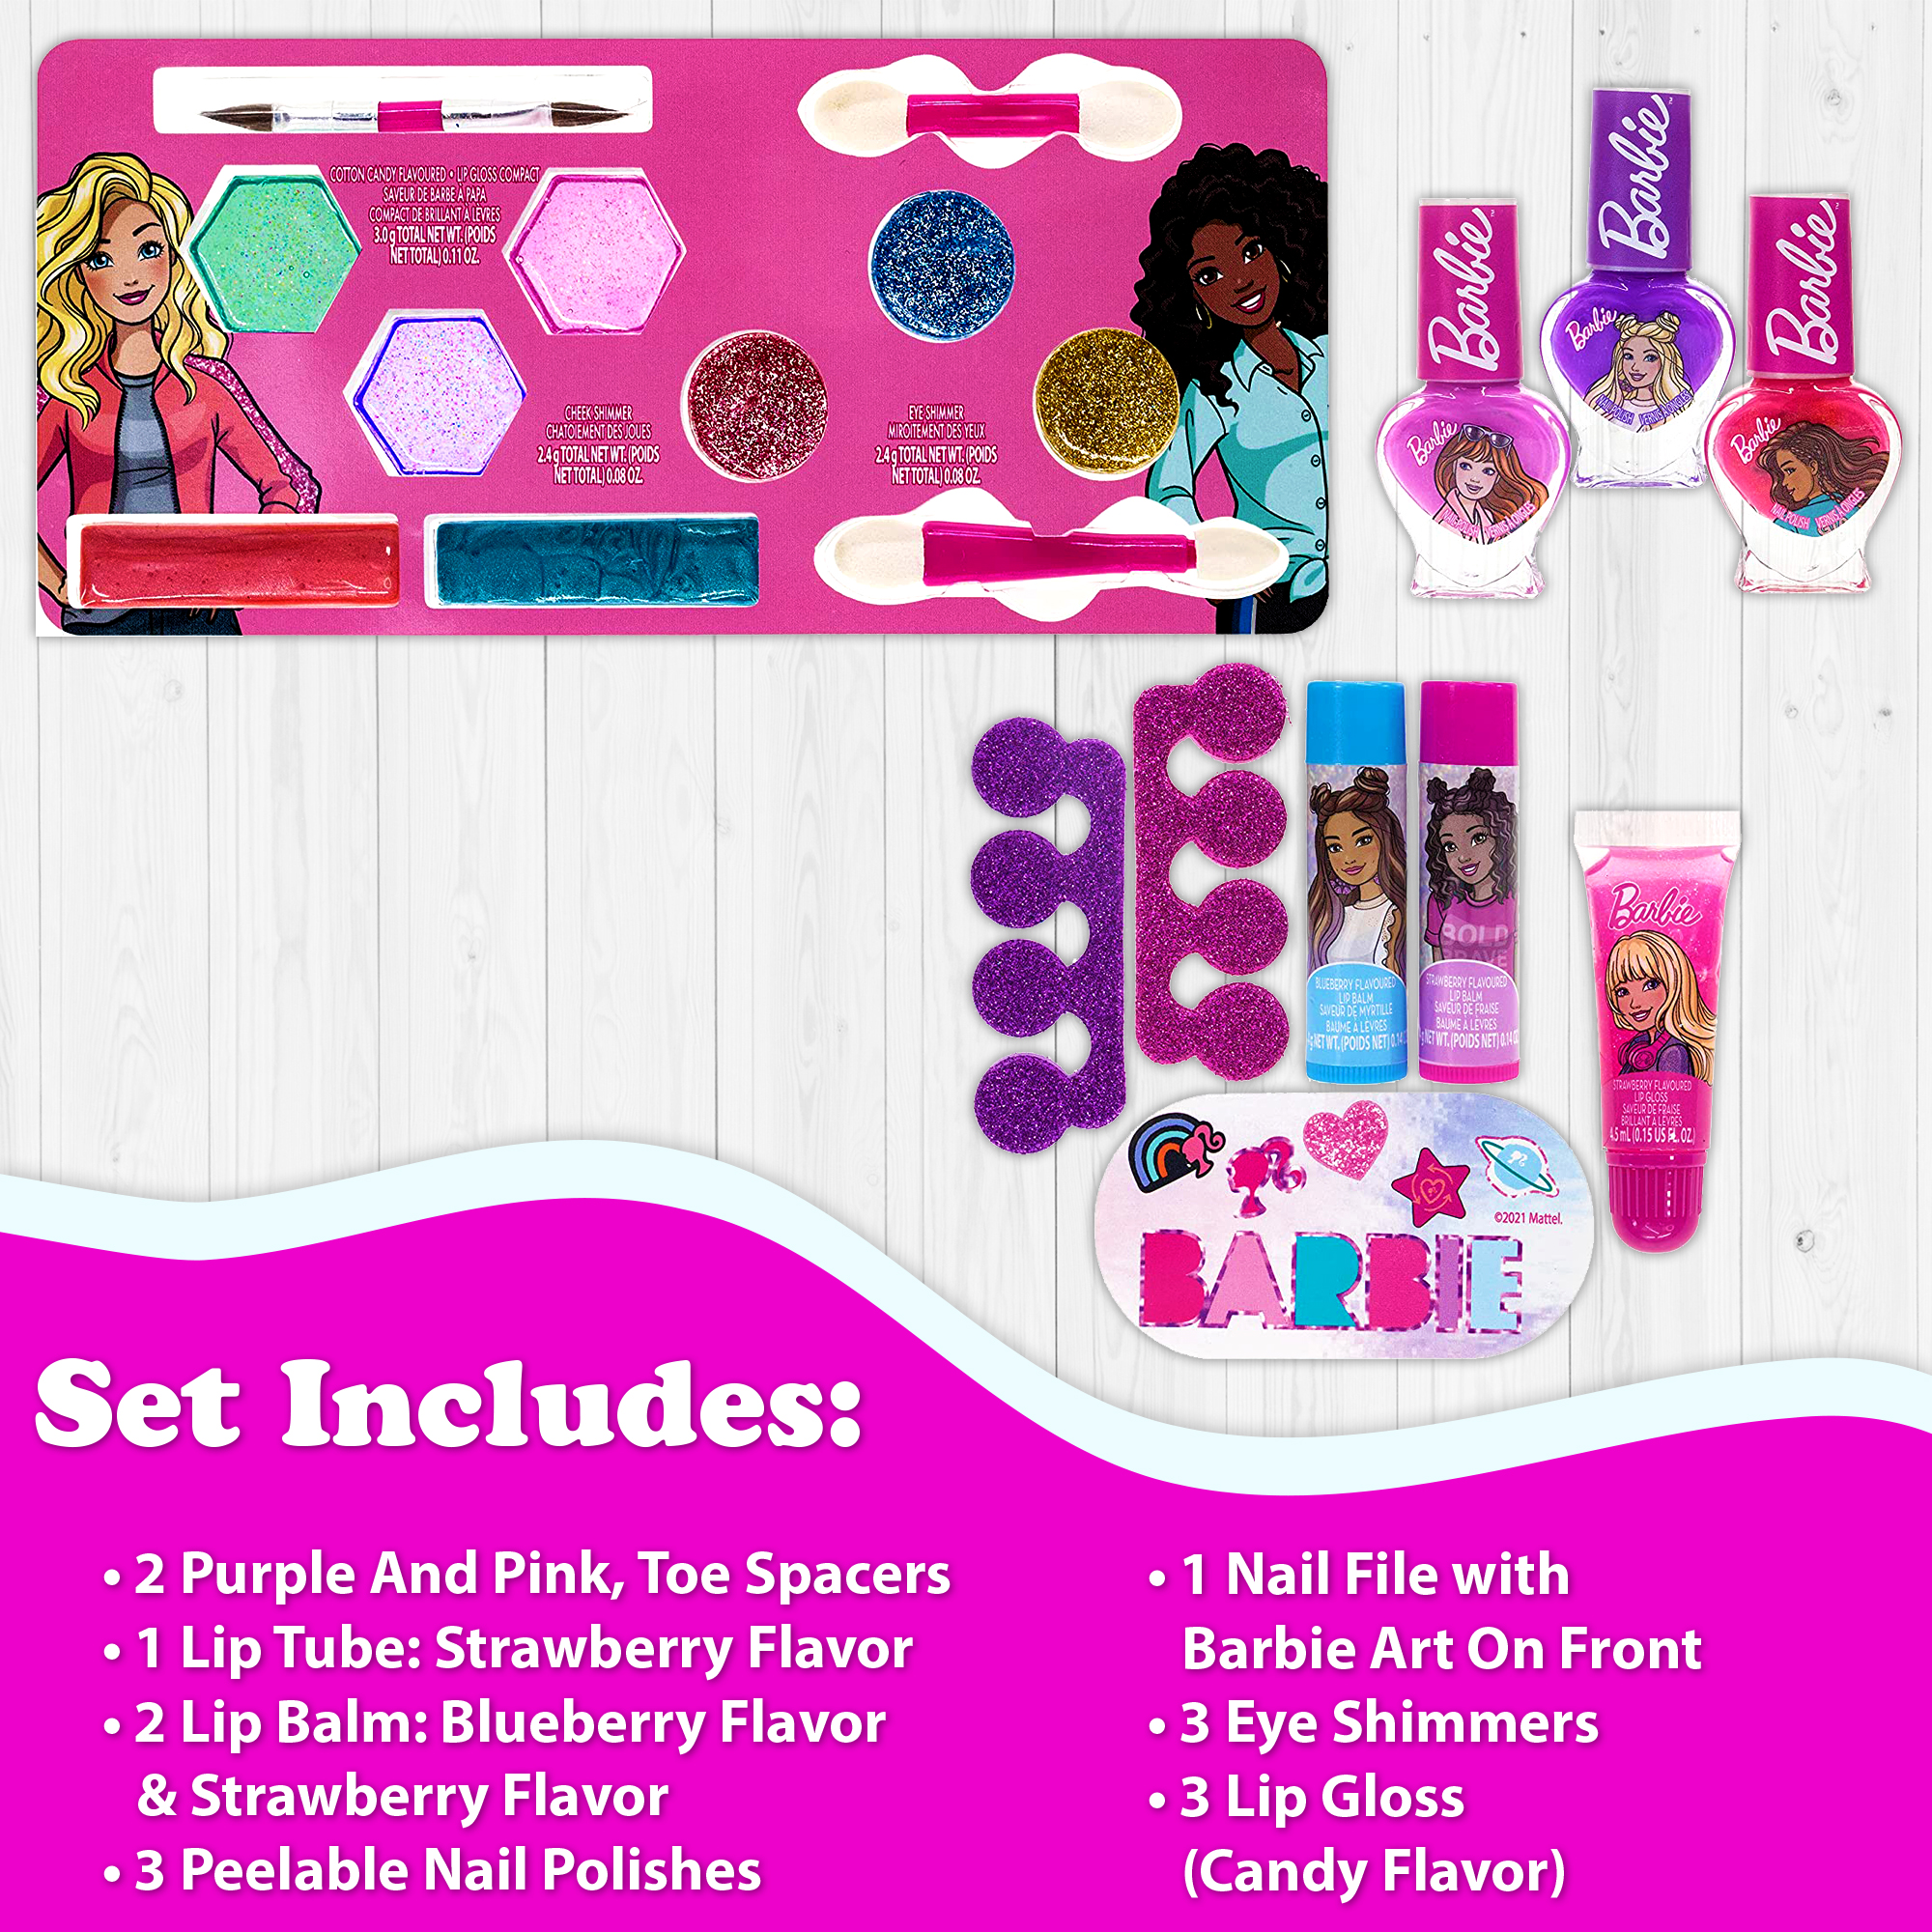 Barbie Train Case Pretend Play Cosmetic Set- Kids Beauty, Toy, Gift for Girls, Ages 3+ by Townley Girl - image 5 of 7